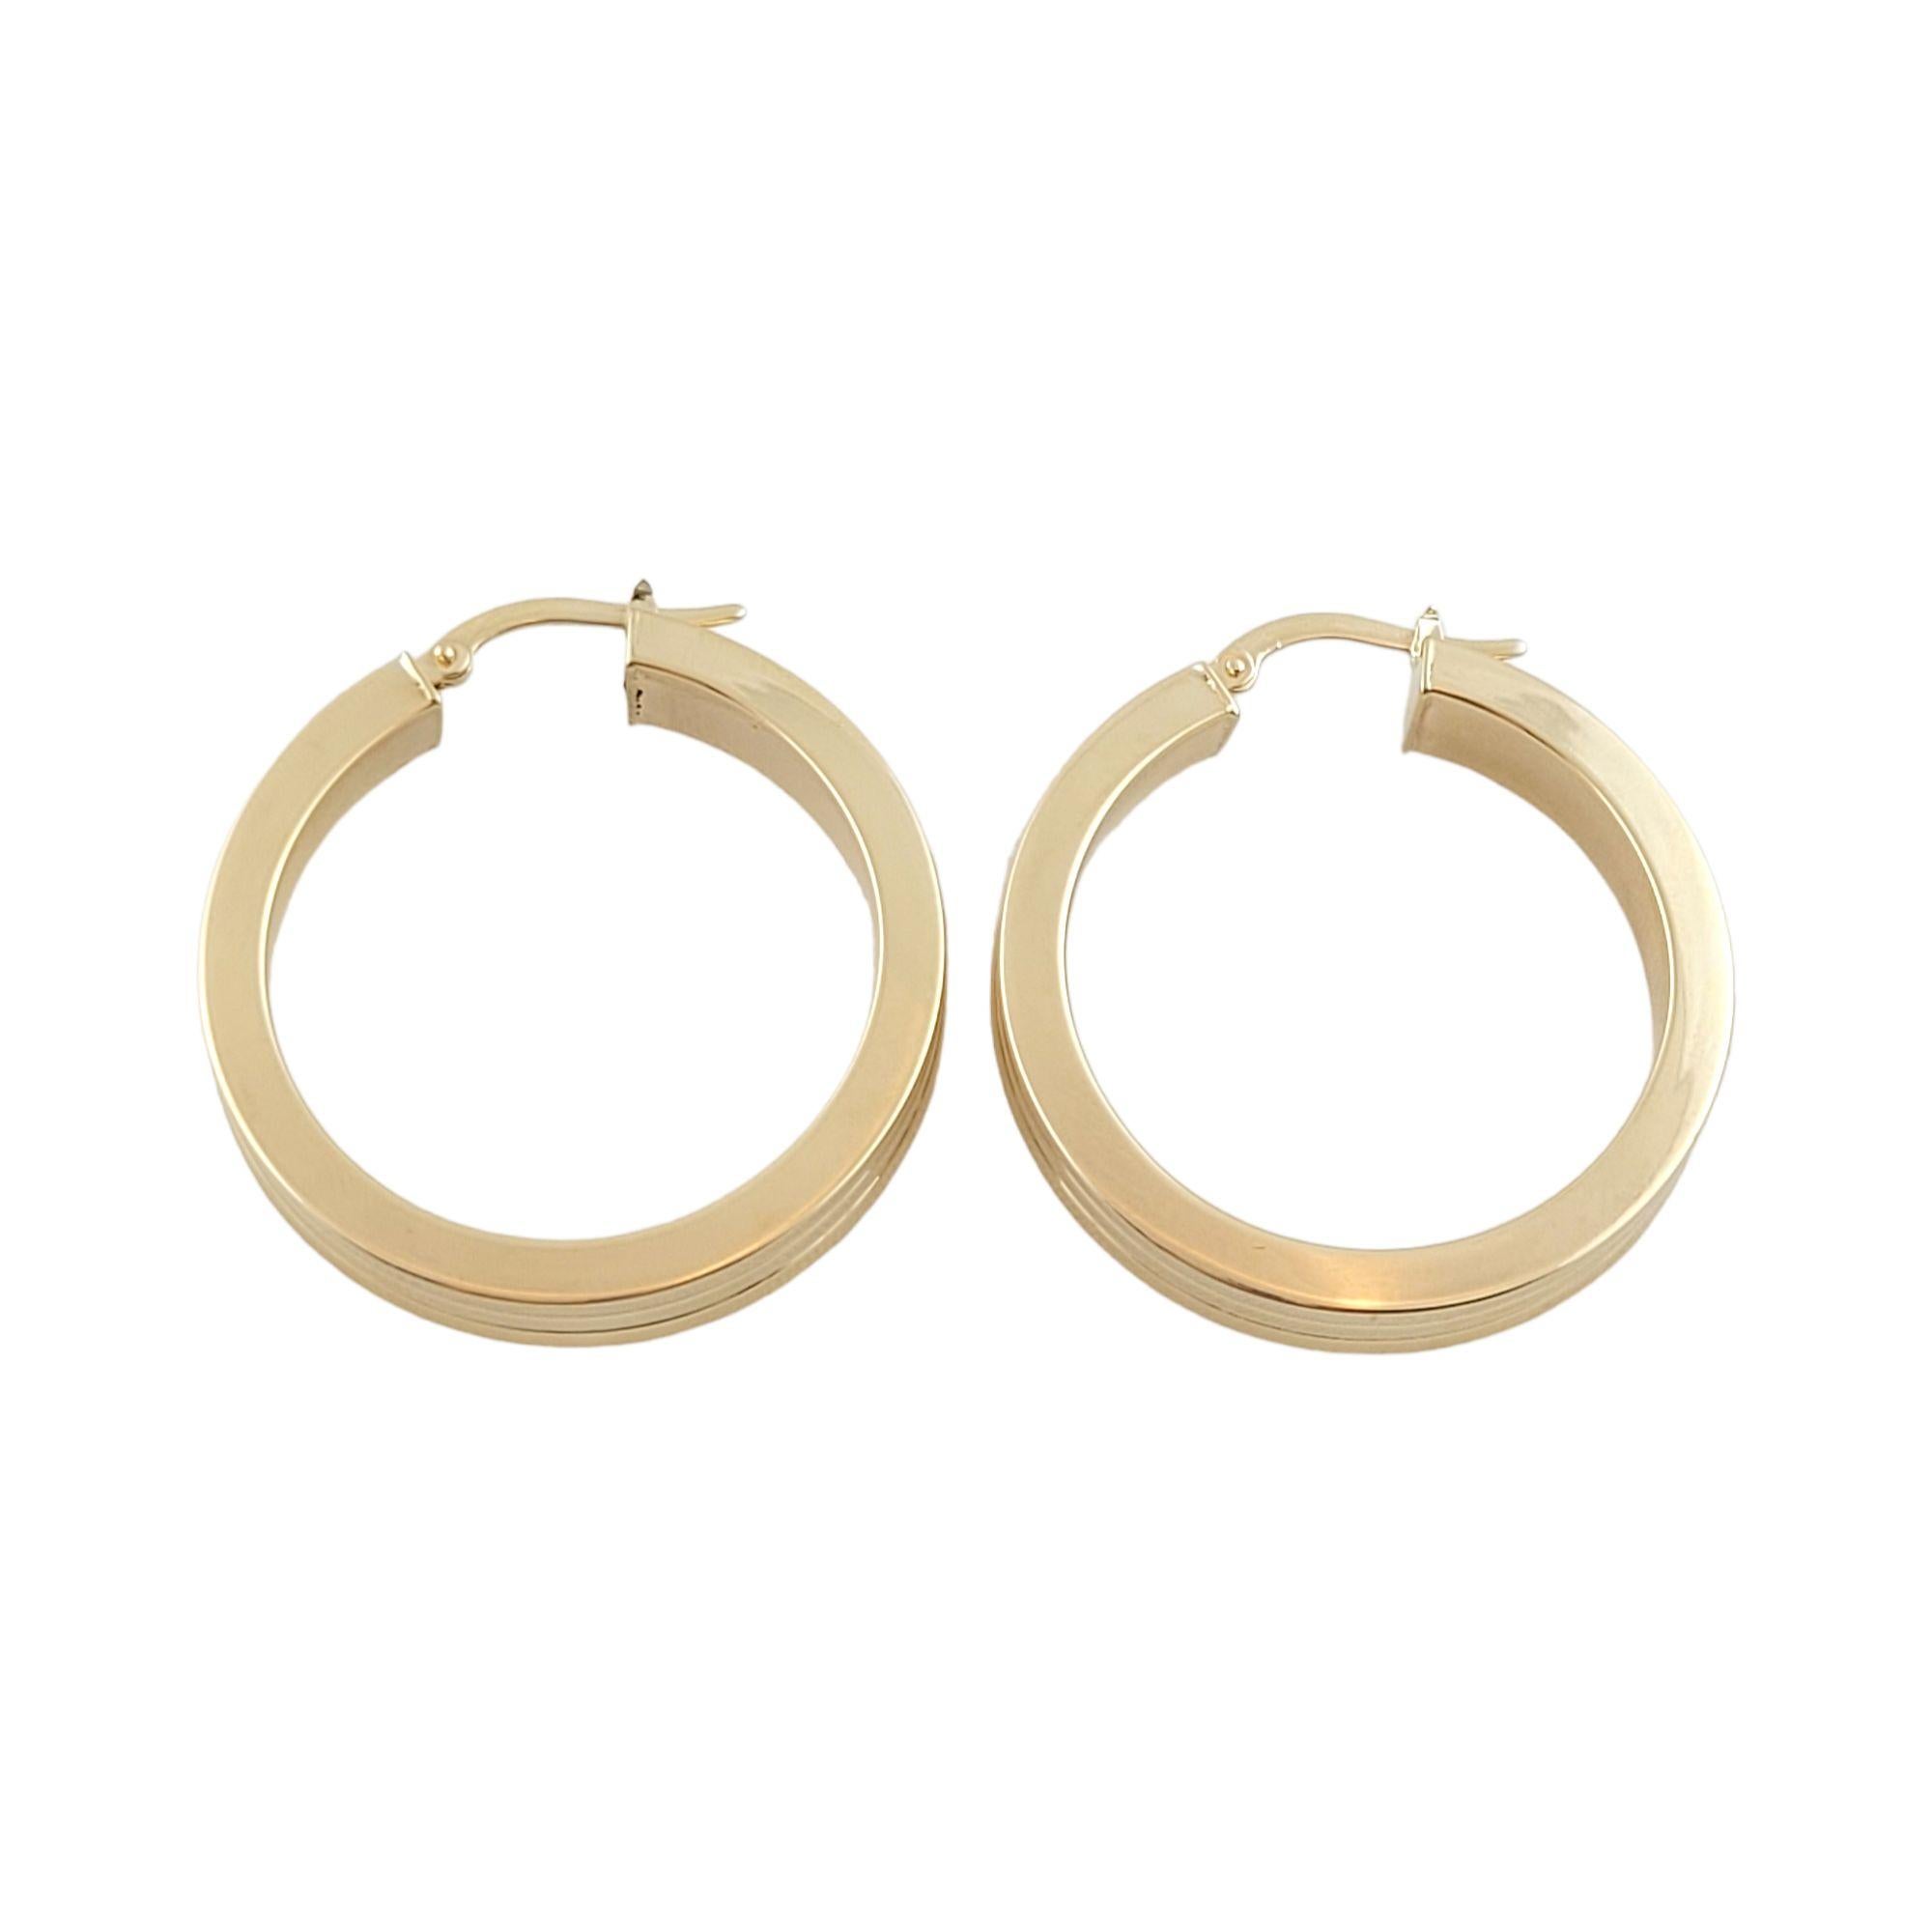 Vintage 14K Yellow Gold Flat Round Hoops

This gorgeous set of flat round hoops would look beautiful on anyone!

Size: 34mm X 32mm X 6mm

Weight: 4.4 g/ 2.8 dwt

Hallmark: 14KT Italy

Very good condition, professionally polished.

Will come packaged